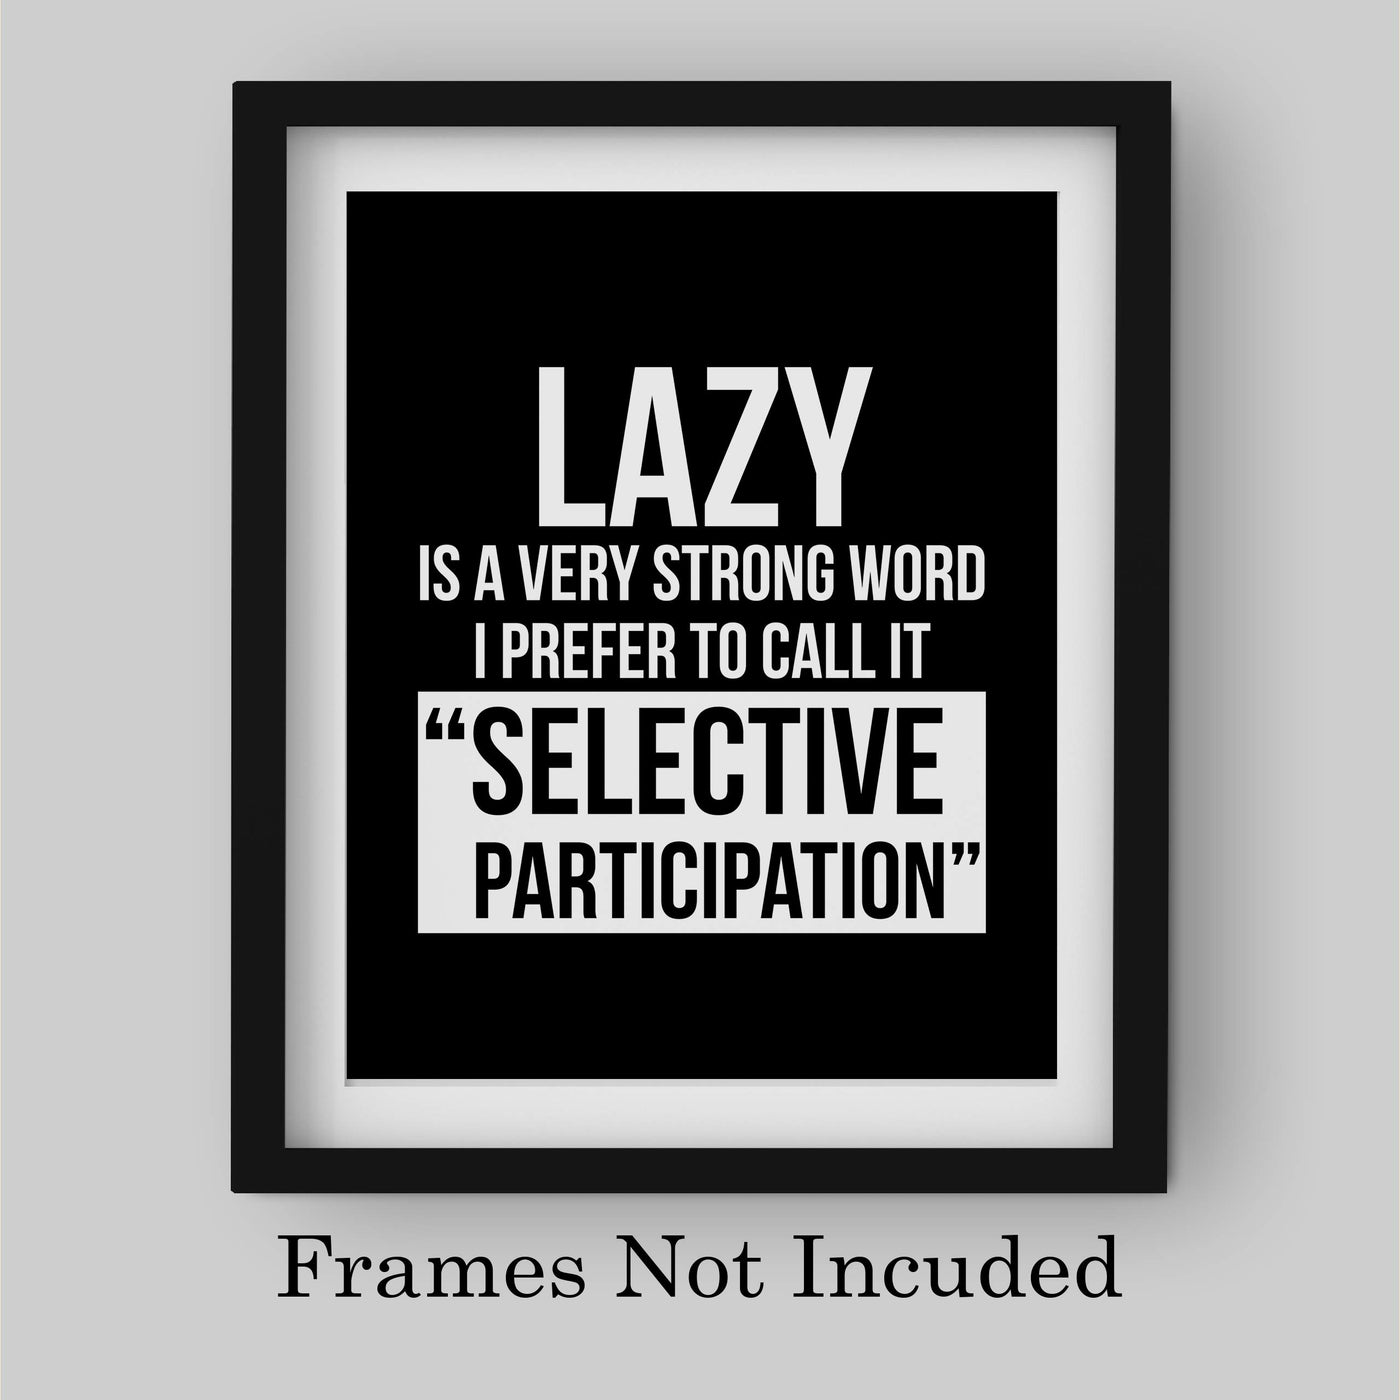 Lazy-I Prefer to Call It Selective Participation Funny Wall Art Sign -8 x 10" Typographic Poster Print-Ready to Frame. Humorous Home-Office-Shop-Cave Decor. Perfect Desk Sign. Great Novelty Gift!